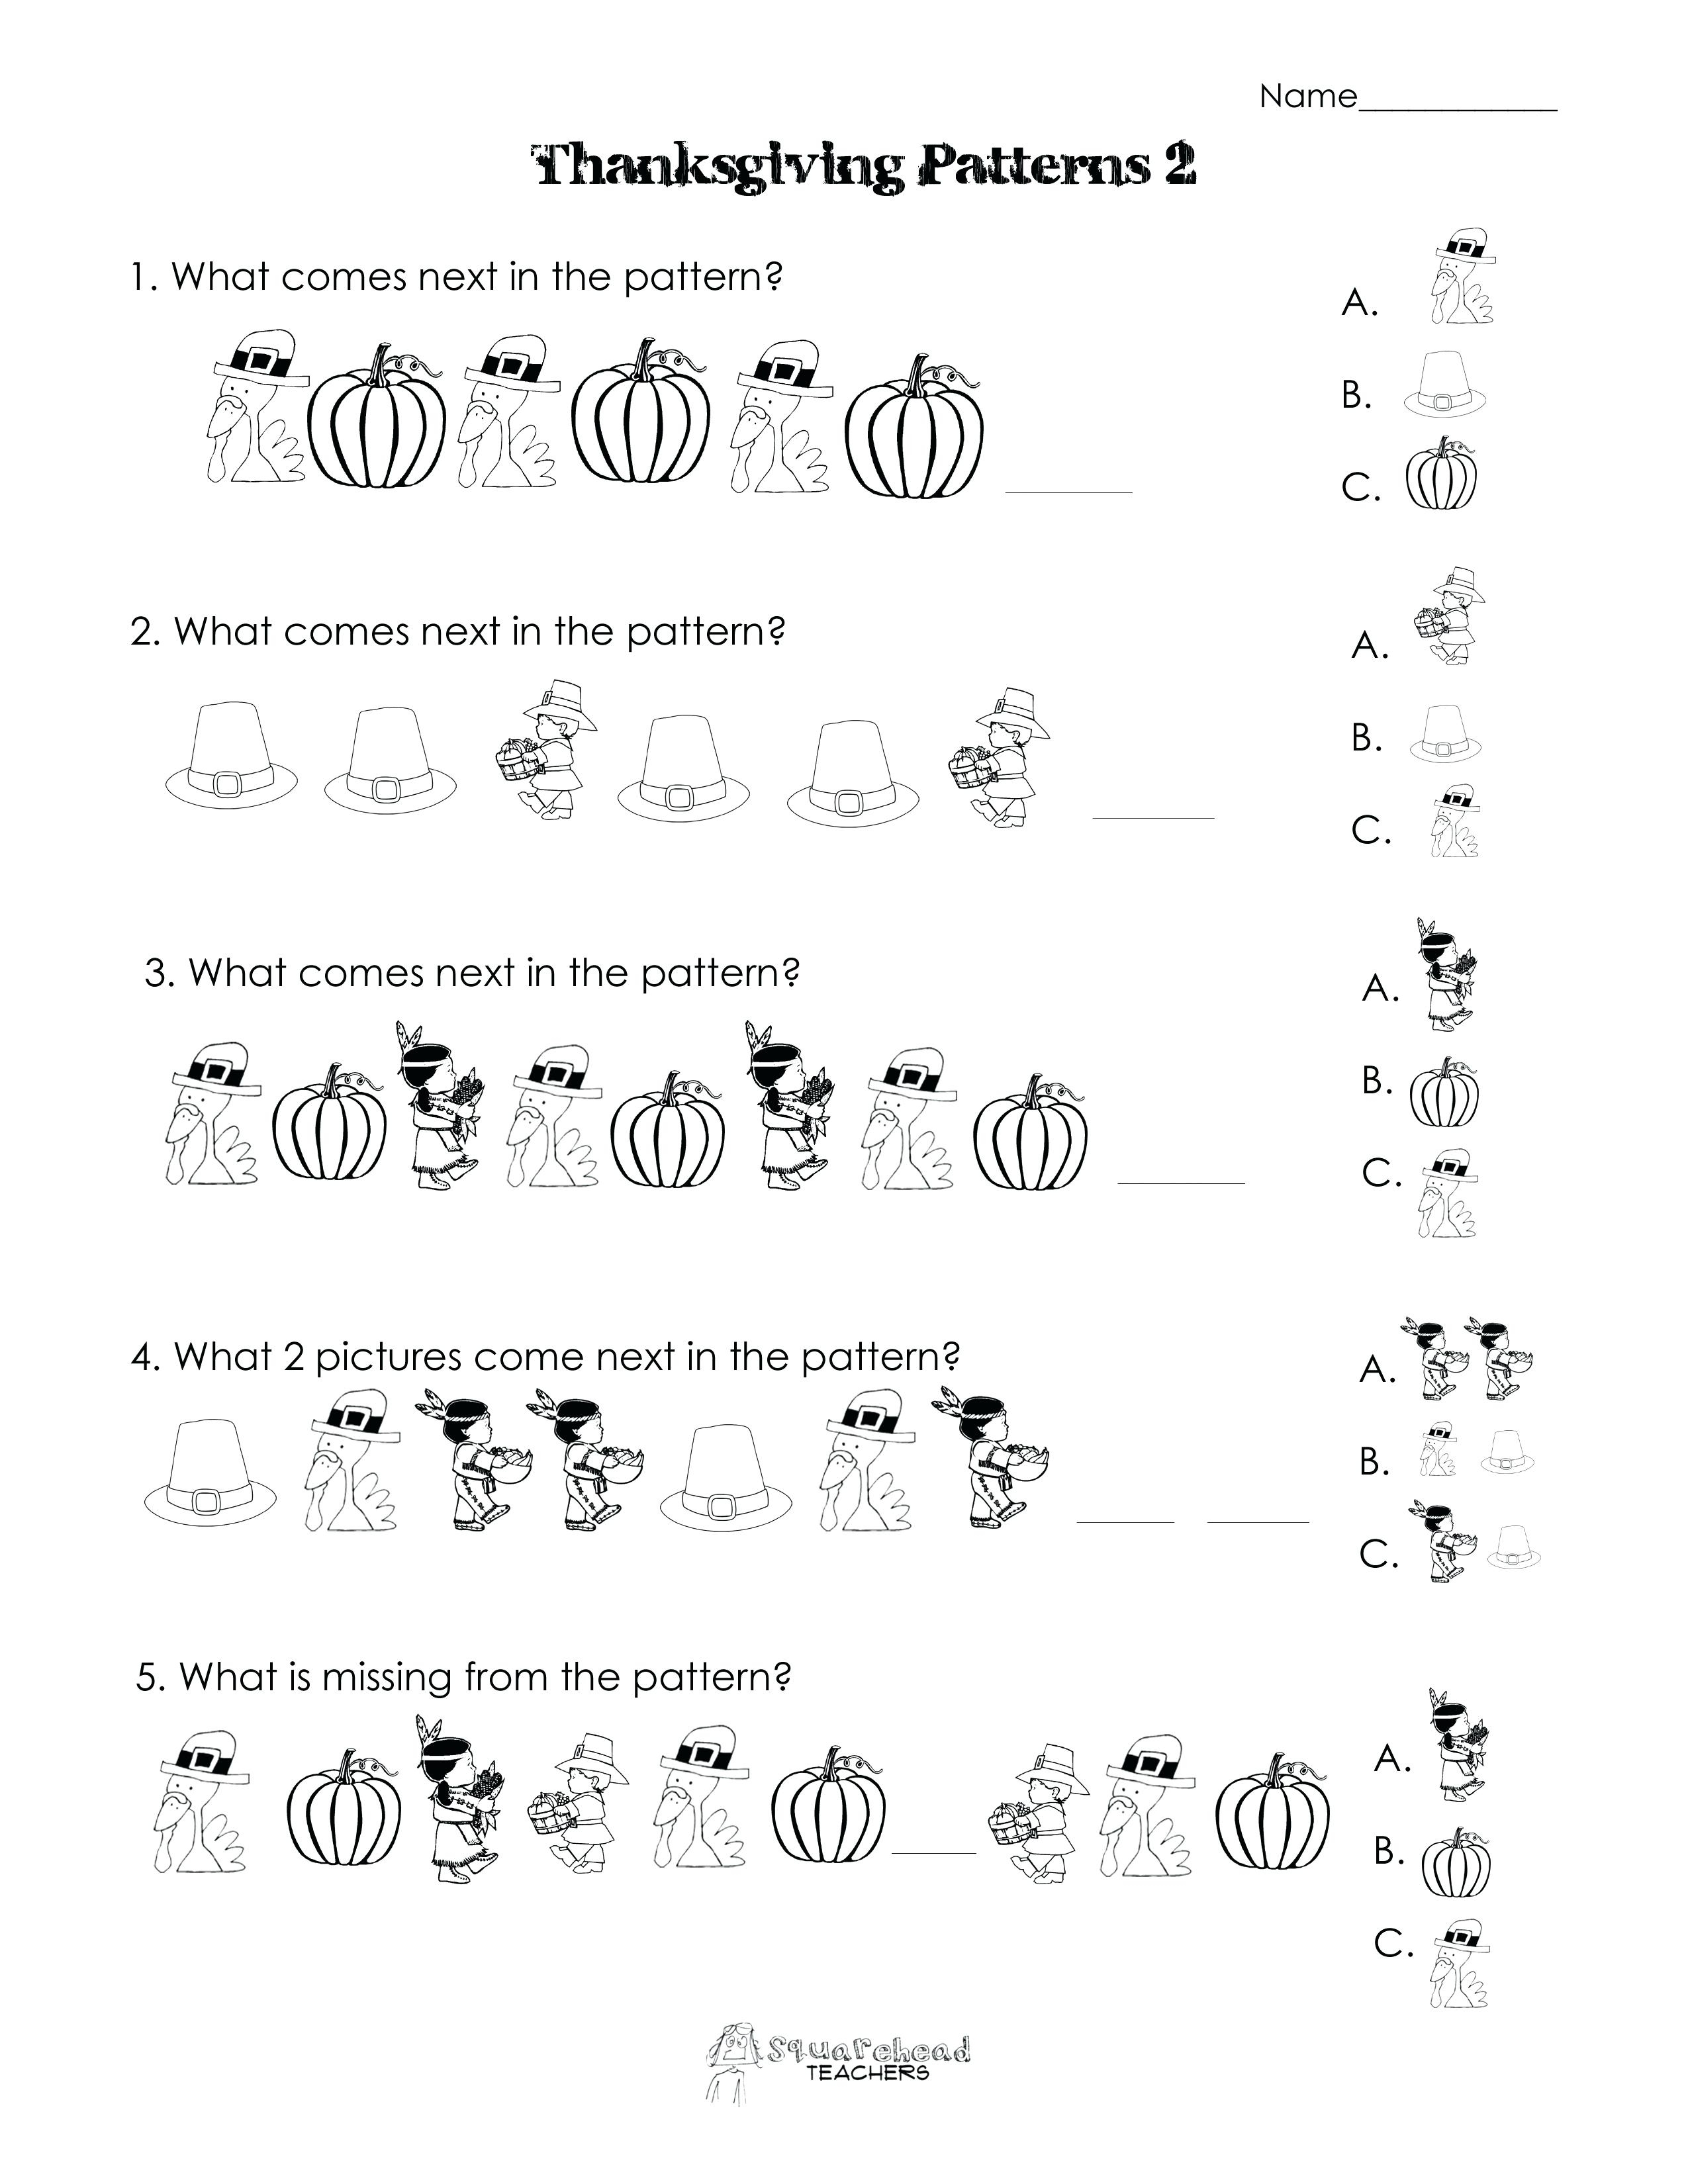 Free Thanksgiving Worksheets Coloring Pages For Thanksgiving - Free Printable Thanksgiving Worksheets For Middle School